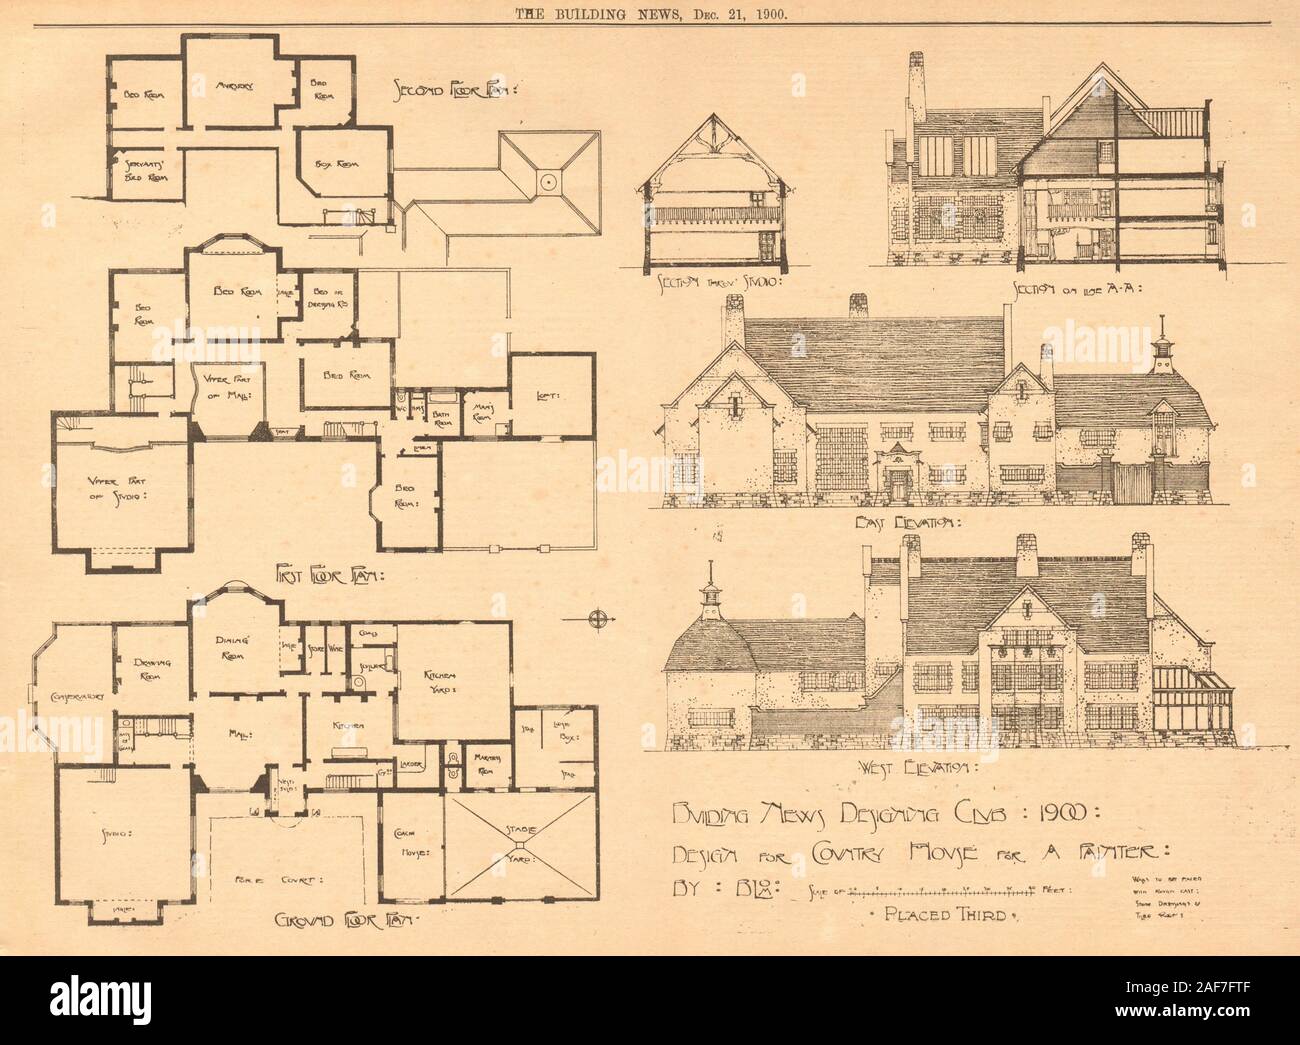 Design For Country House For A Painter By Blom Plan 1900 Old